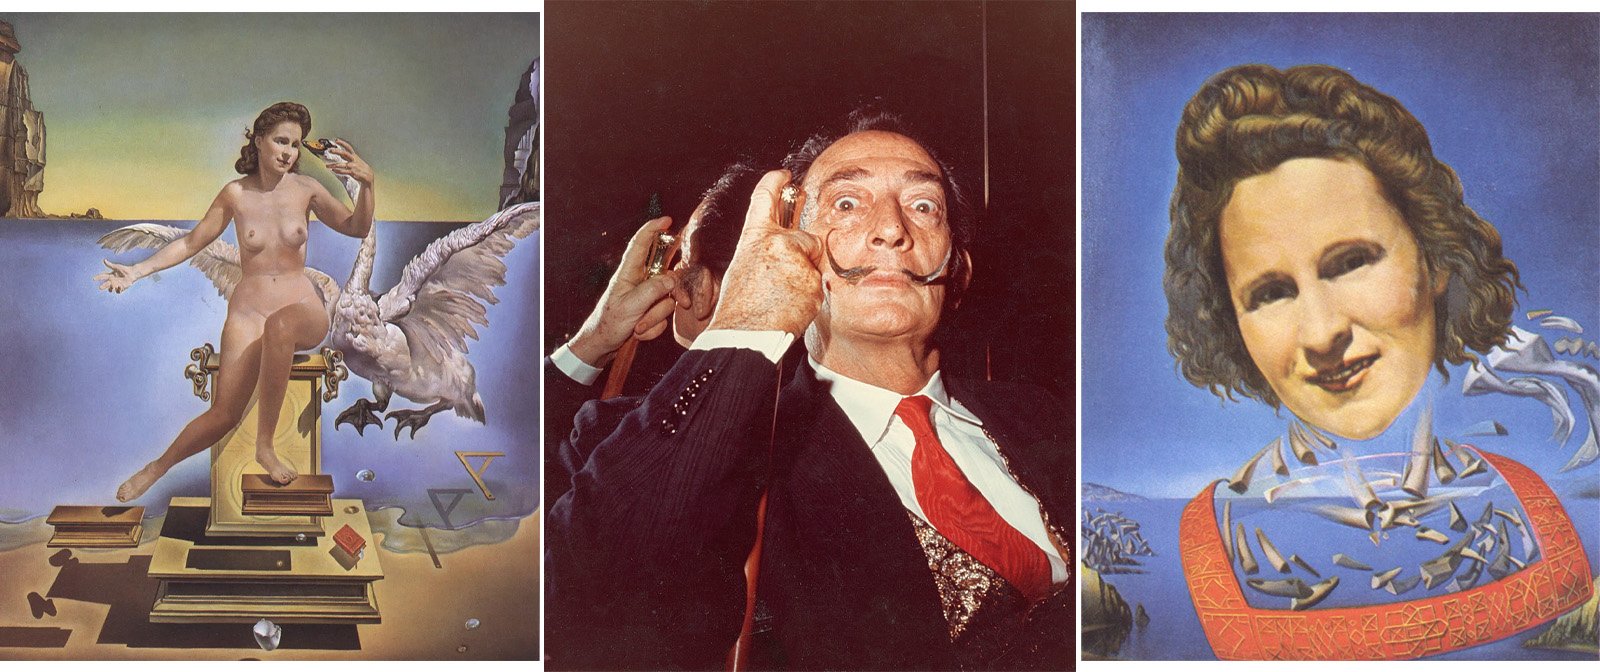 Why did Salvador Dalí live his whole life with his Russian wife Gala, who cheated on him with young lovers and was 10 years older than him?